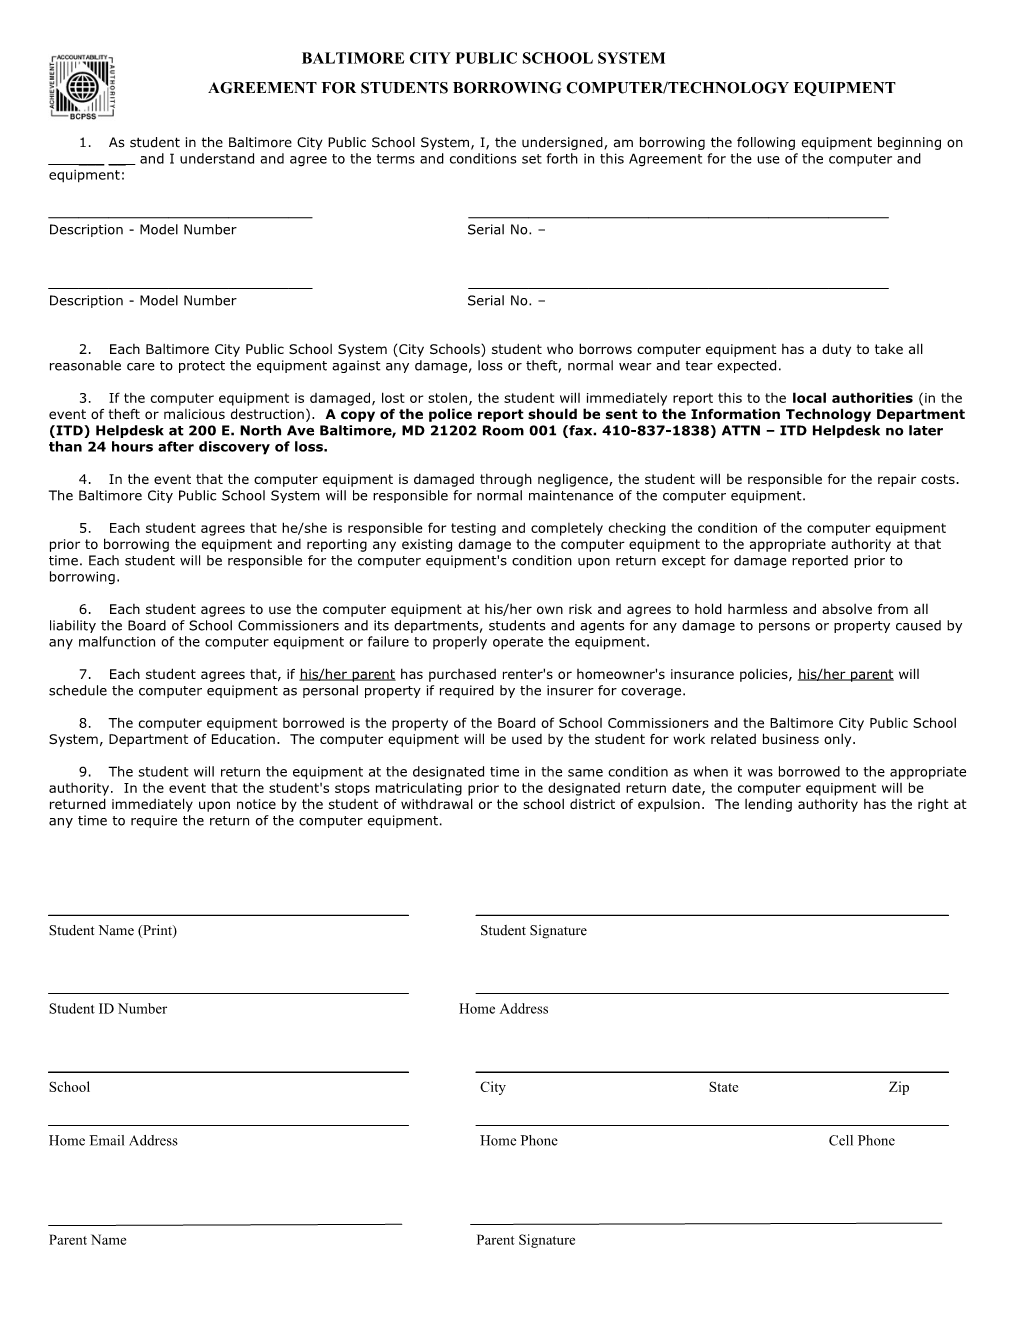 Agreement for Students Borrowing Computer/Technology Equipment